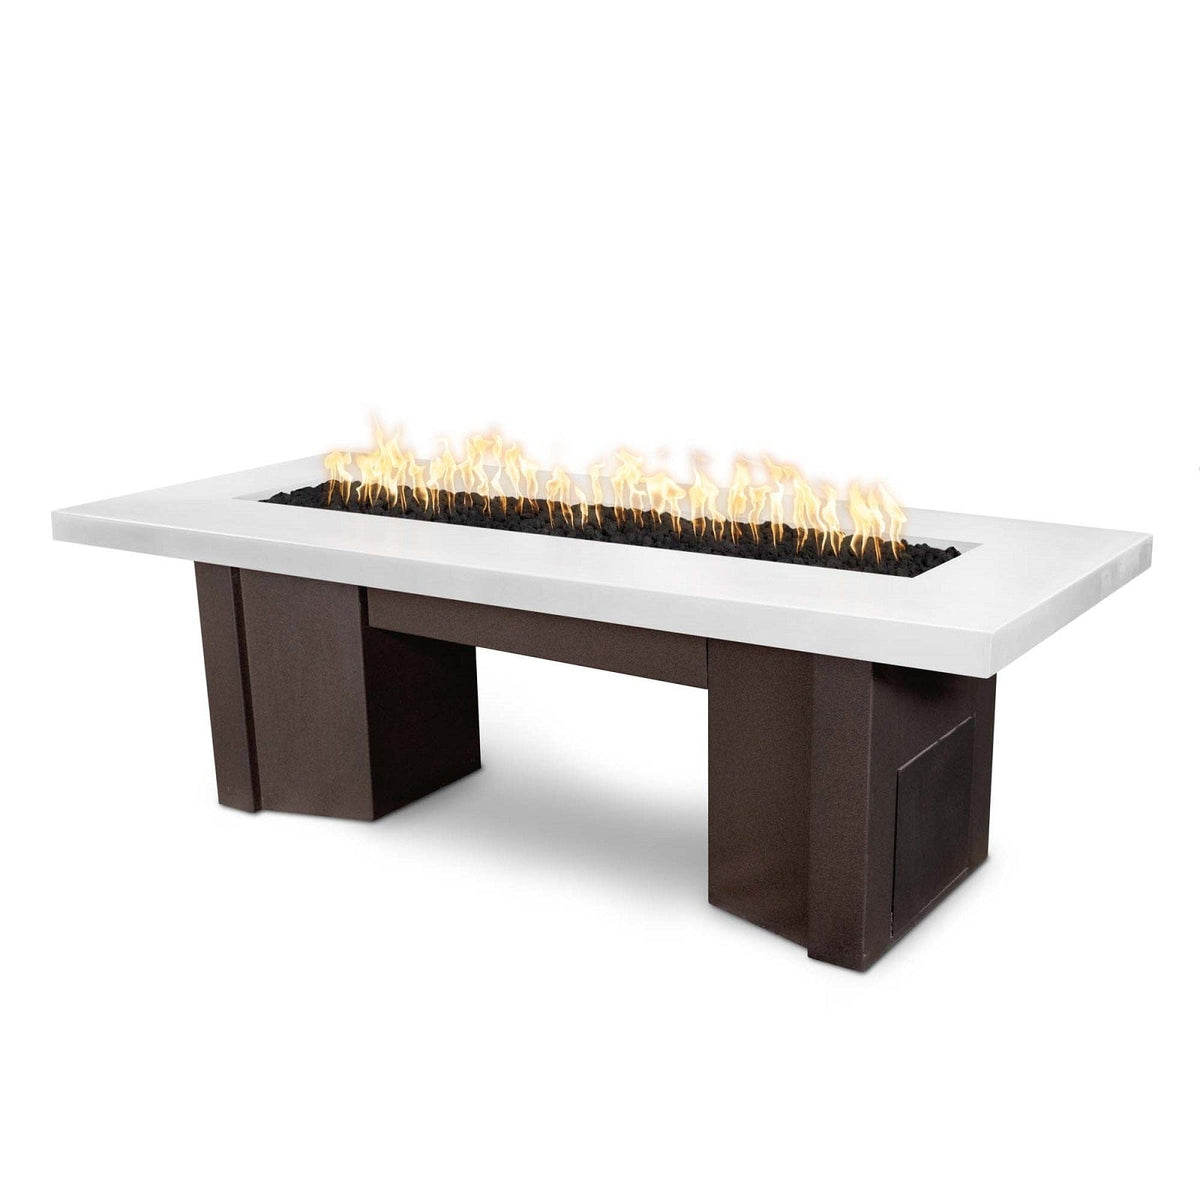 The Outdoor Plus Fire Features Limestone (-LIM) / Java Powder Coated Steel (-JAV) The Outdoor Plus 60&quot; Alameda Fire Table Smooth Concrete in Liquid Propane - Flame Sense System with Push Button Spark Igniter / OPT-ALMGFRC60FSEN-LP